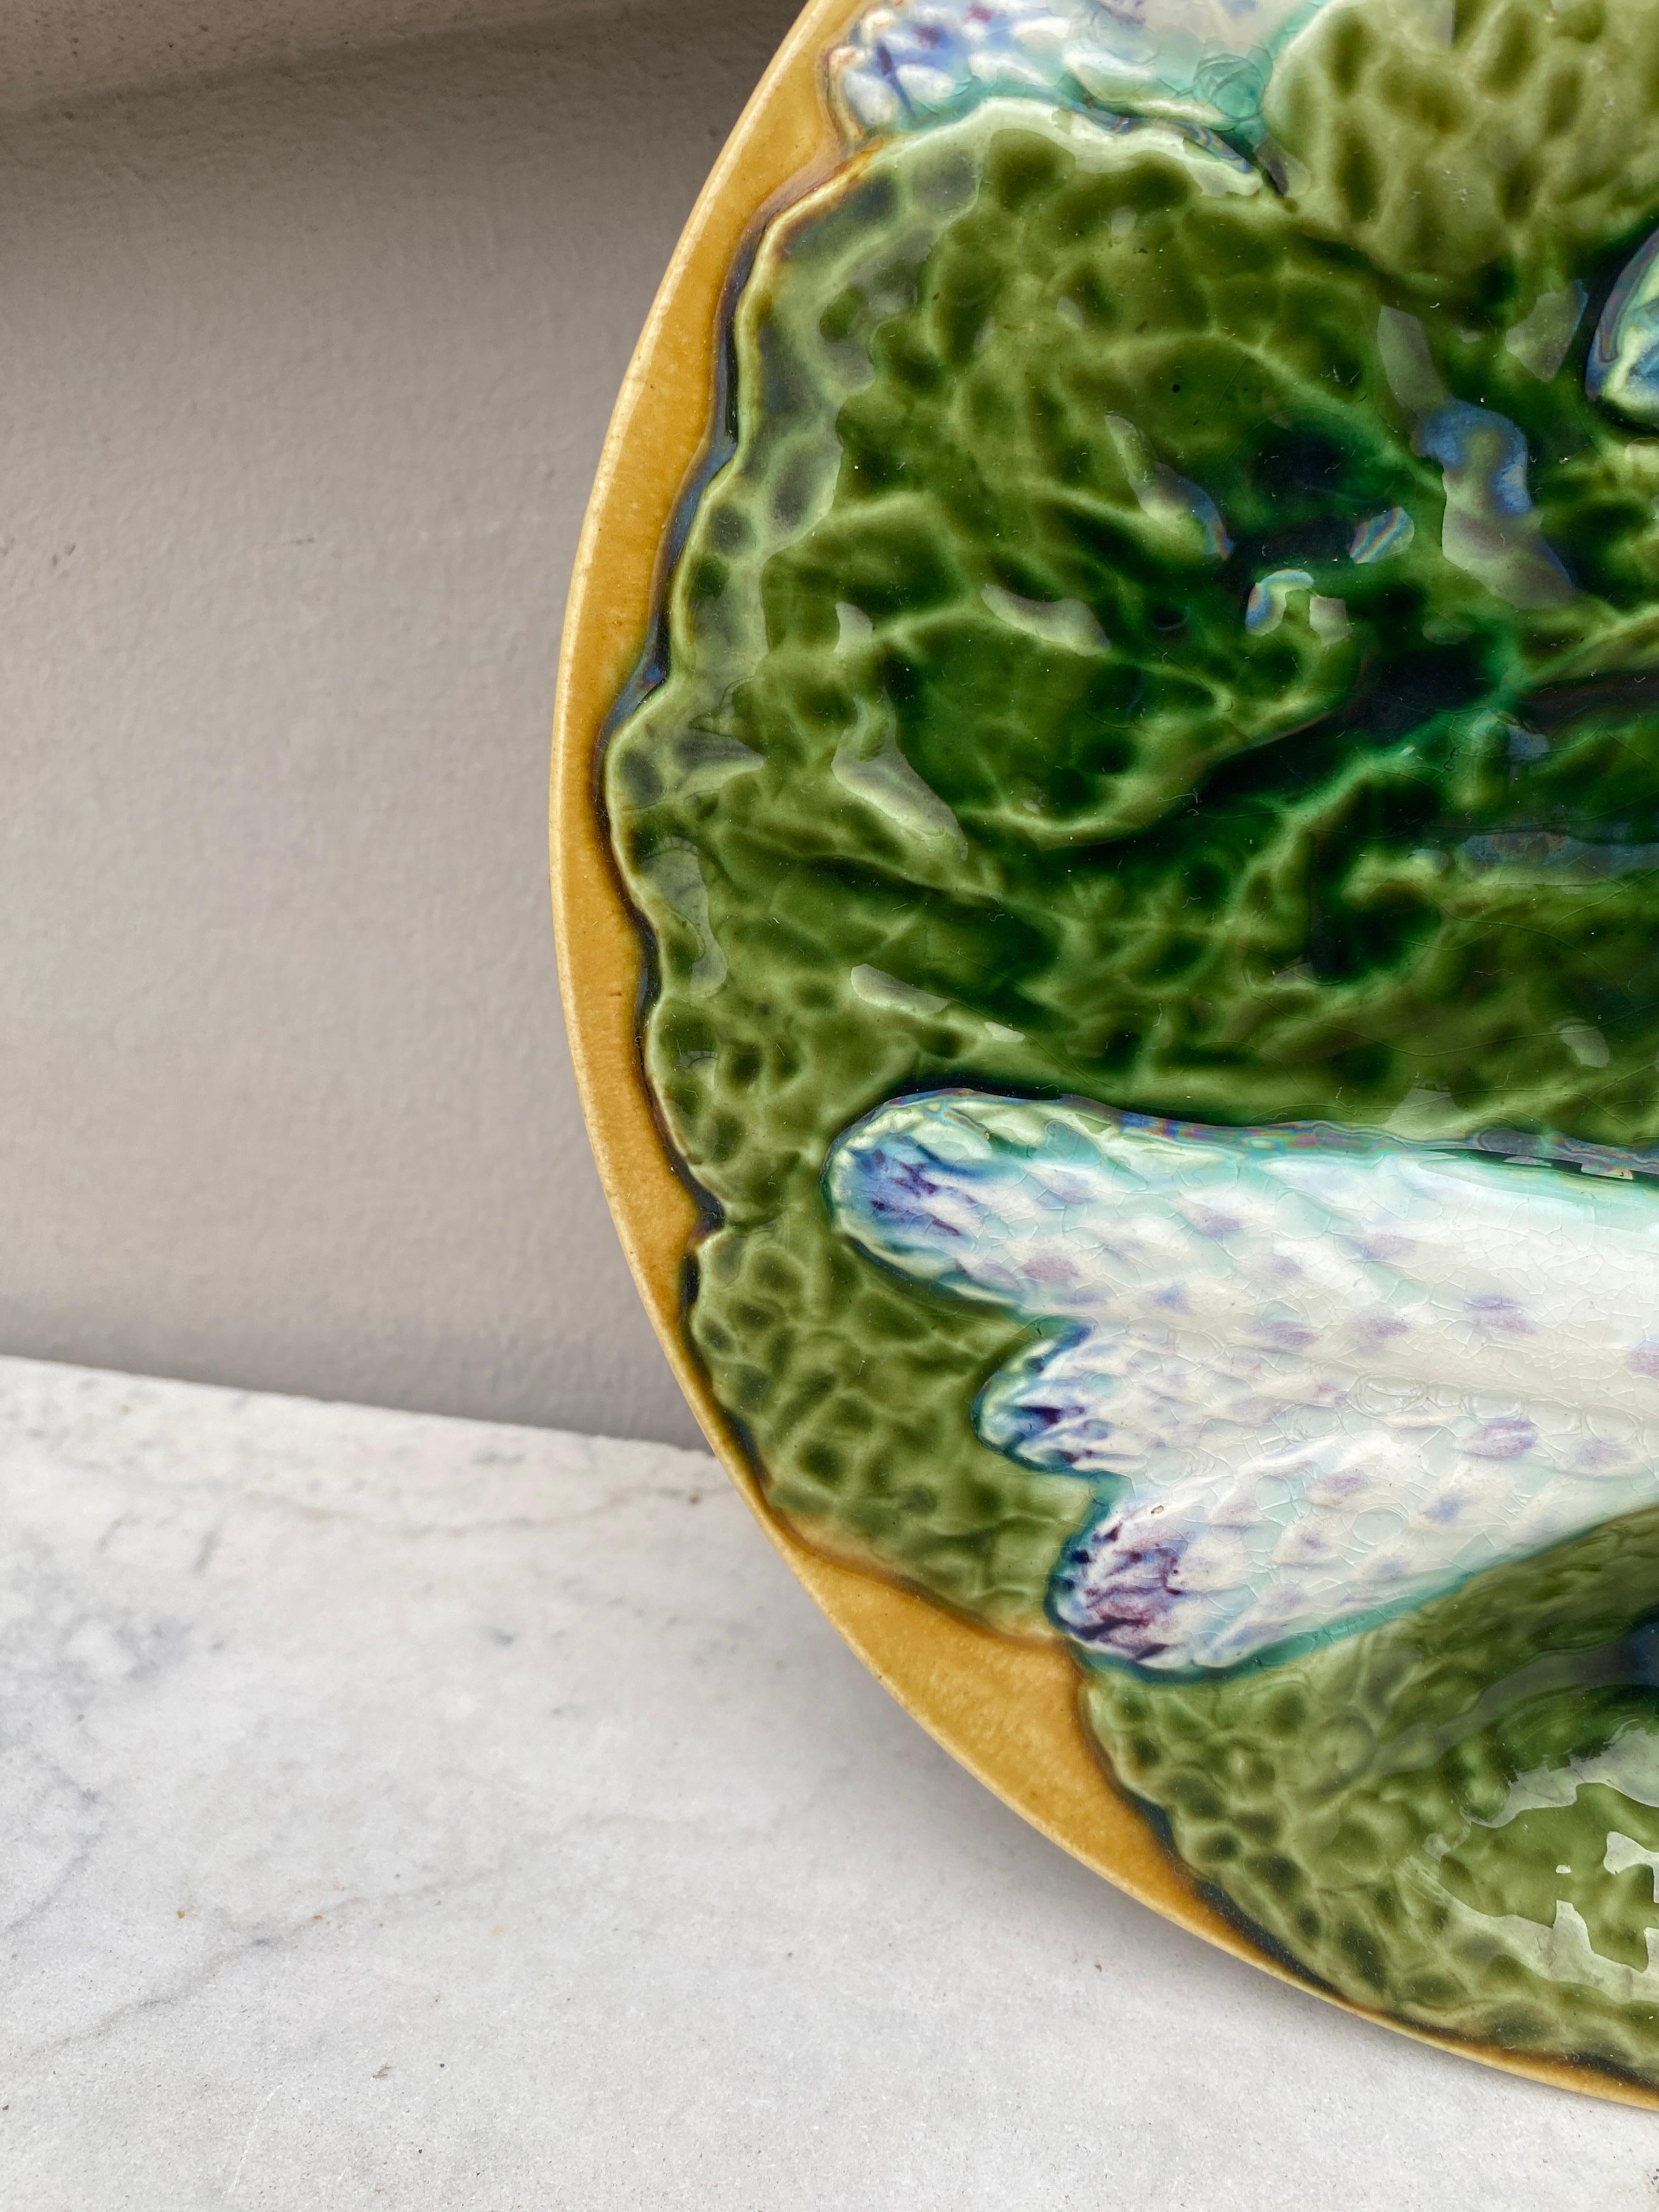 Unusual 19th century majolica asparagus plates with large green cabbages leaves on a yellow background (usually on blue background), very colorful plates made by the Manufacture of Creil and Montereau.
This manufacture didn't produced a lot of